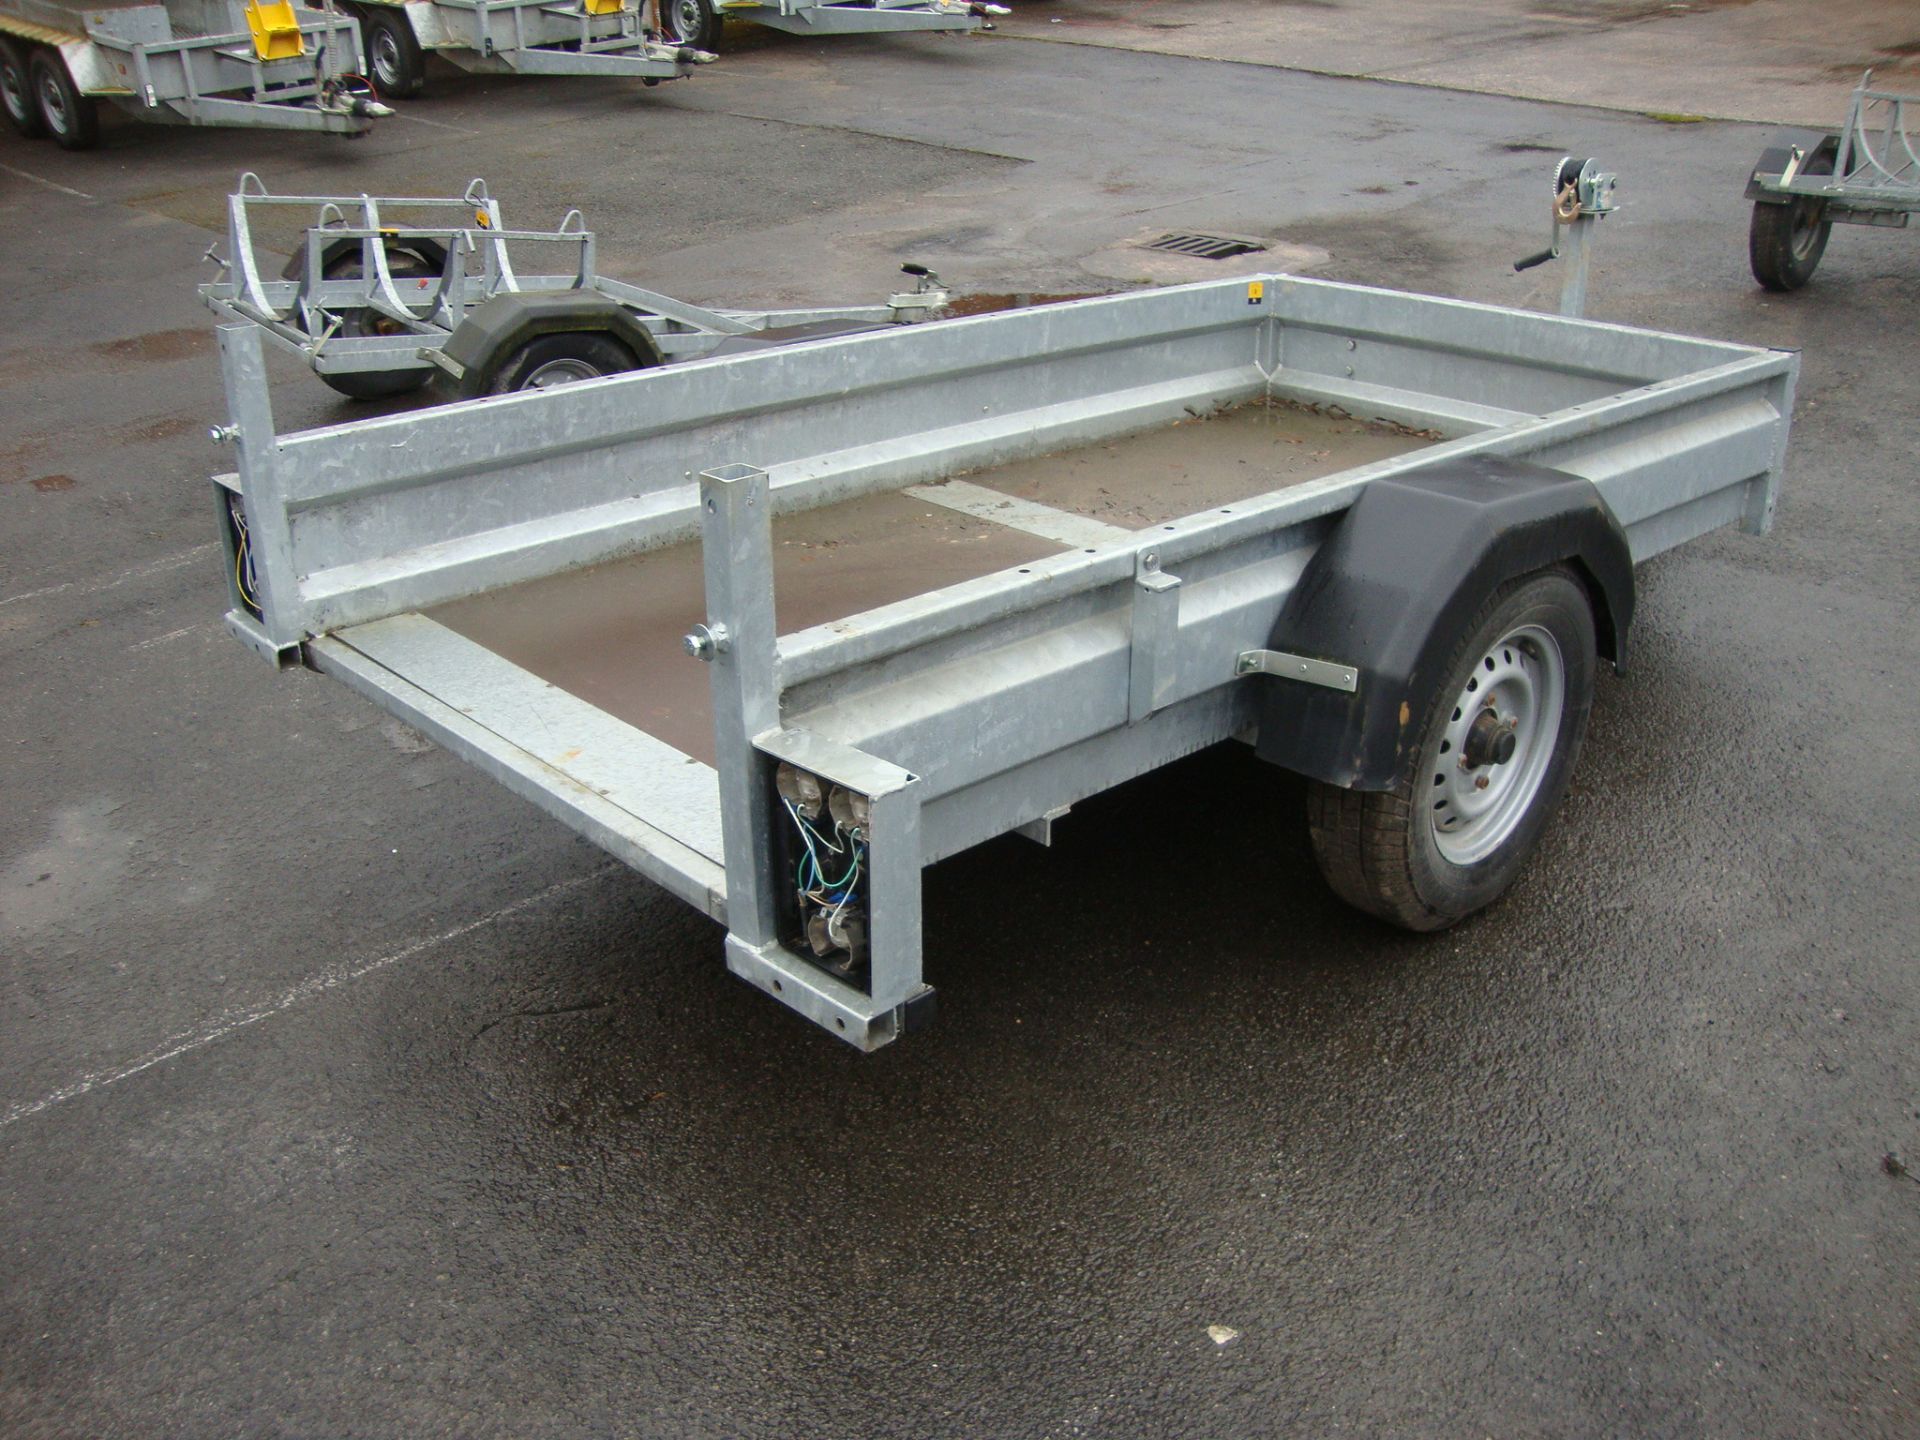 Single axle trailer with open rear (suitable for attaching a small drop down panel or a large ramp), - Image 3 of 7